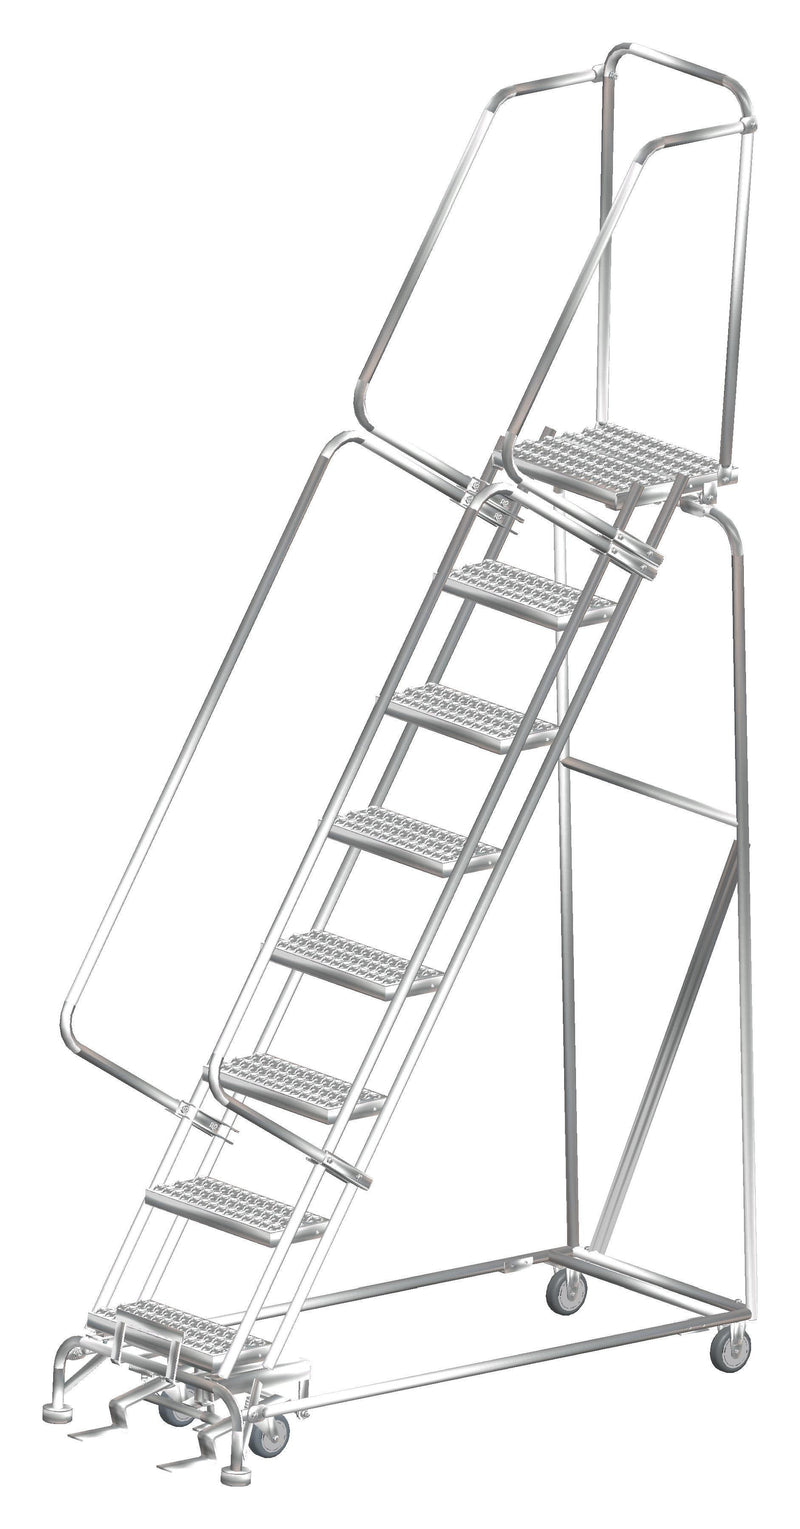 Rolling Ladder - M-2000 Series - 8 Step, Handrails - Ballymore